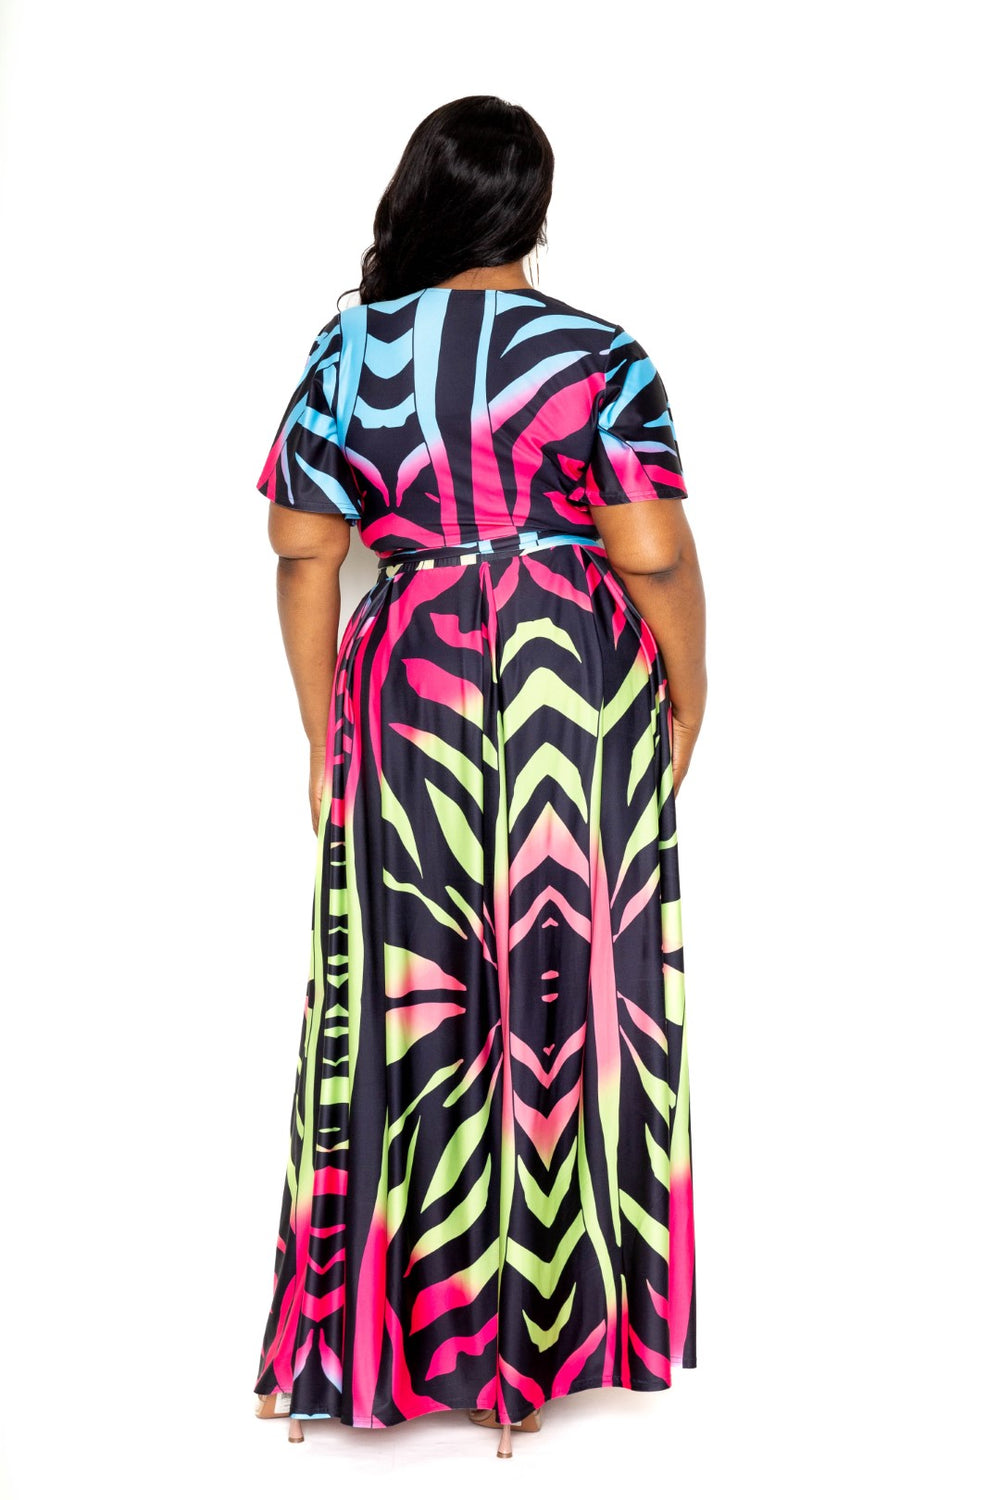 Buxom Couture Ombre Tribal Maxi Skirt & Top Set Outfit Sets RYSE Clothing Co.   